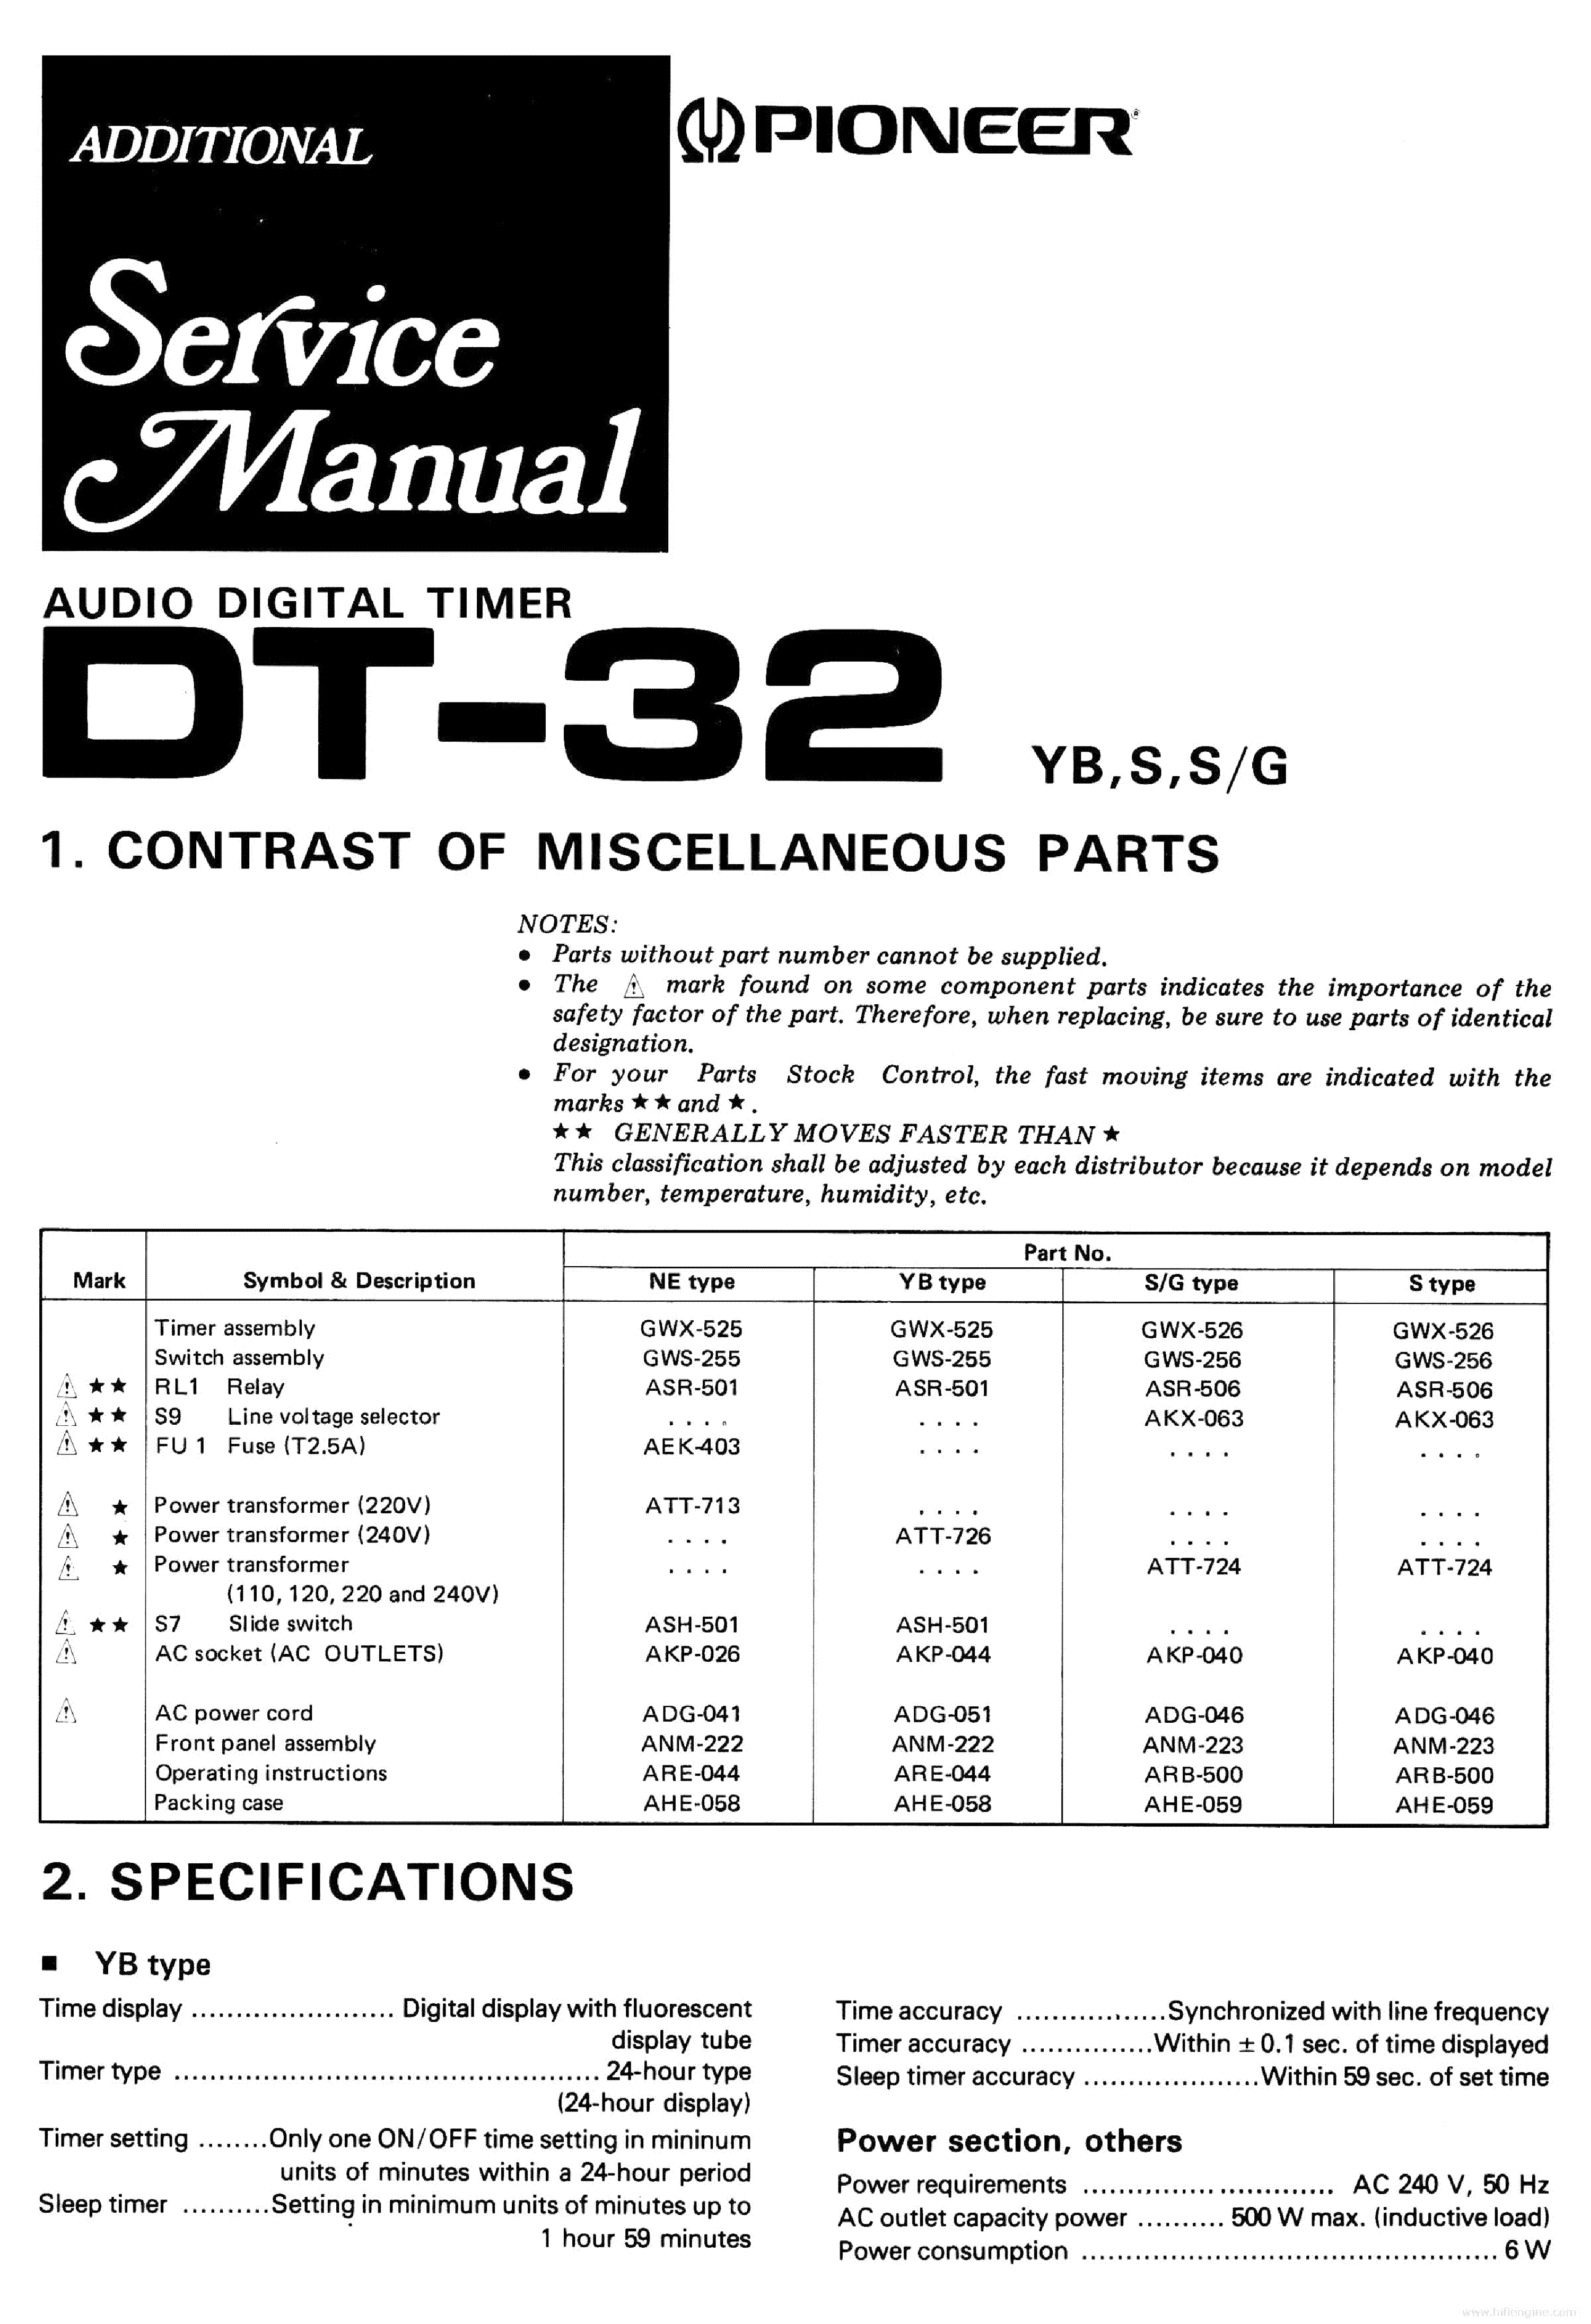 PIONEER DT-32 ADDITIONAL SM service manual (1st page)